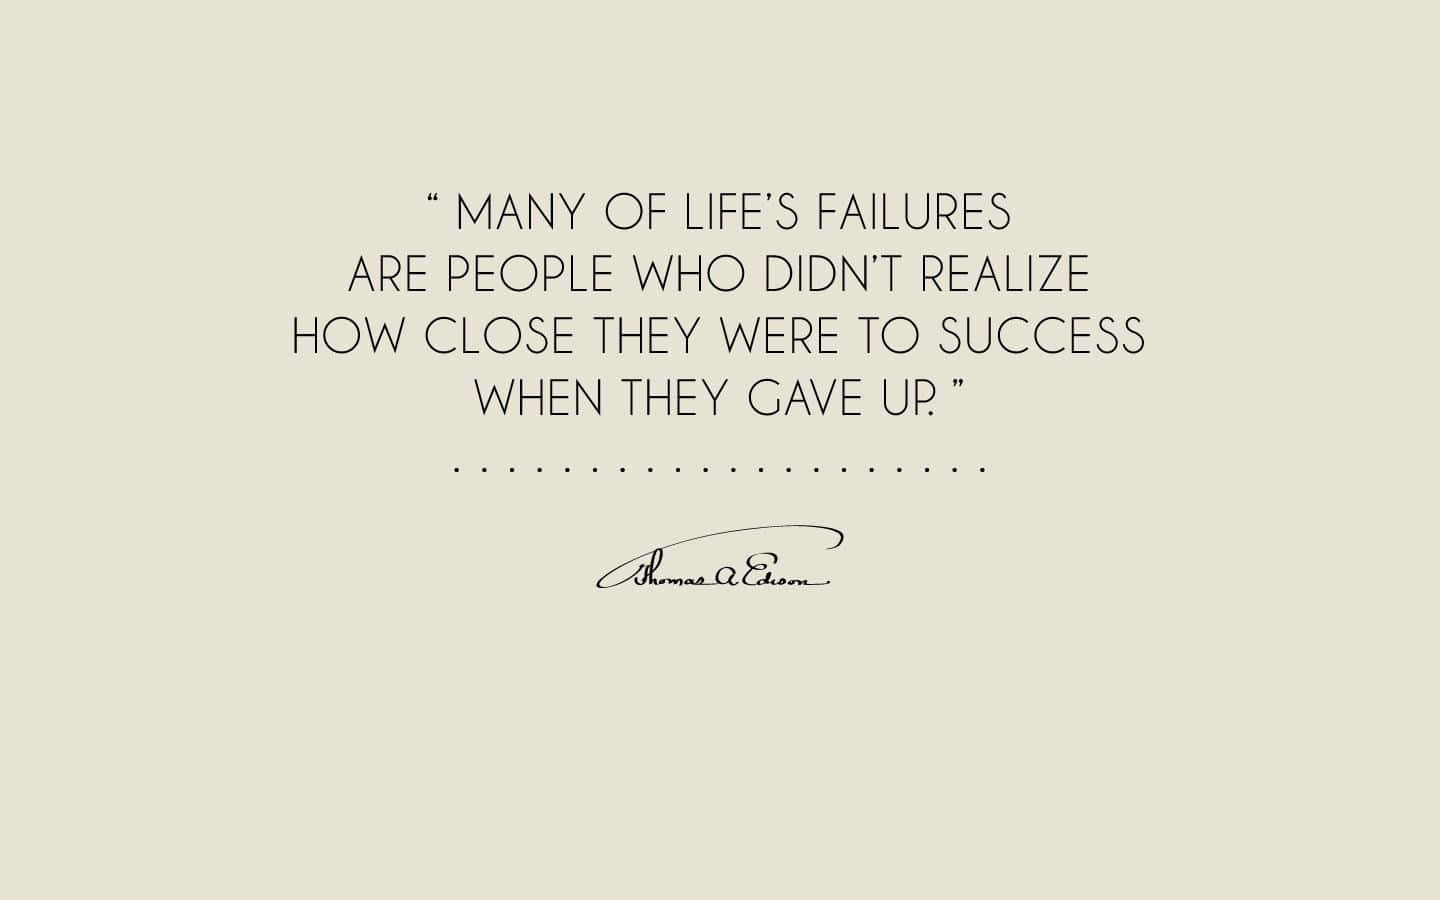 A Quote That Says Many Of Life's Failures Are People Who Realize They Had To Give Up